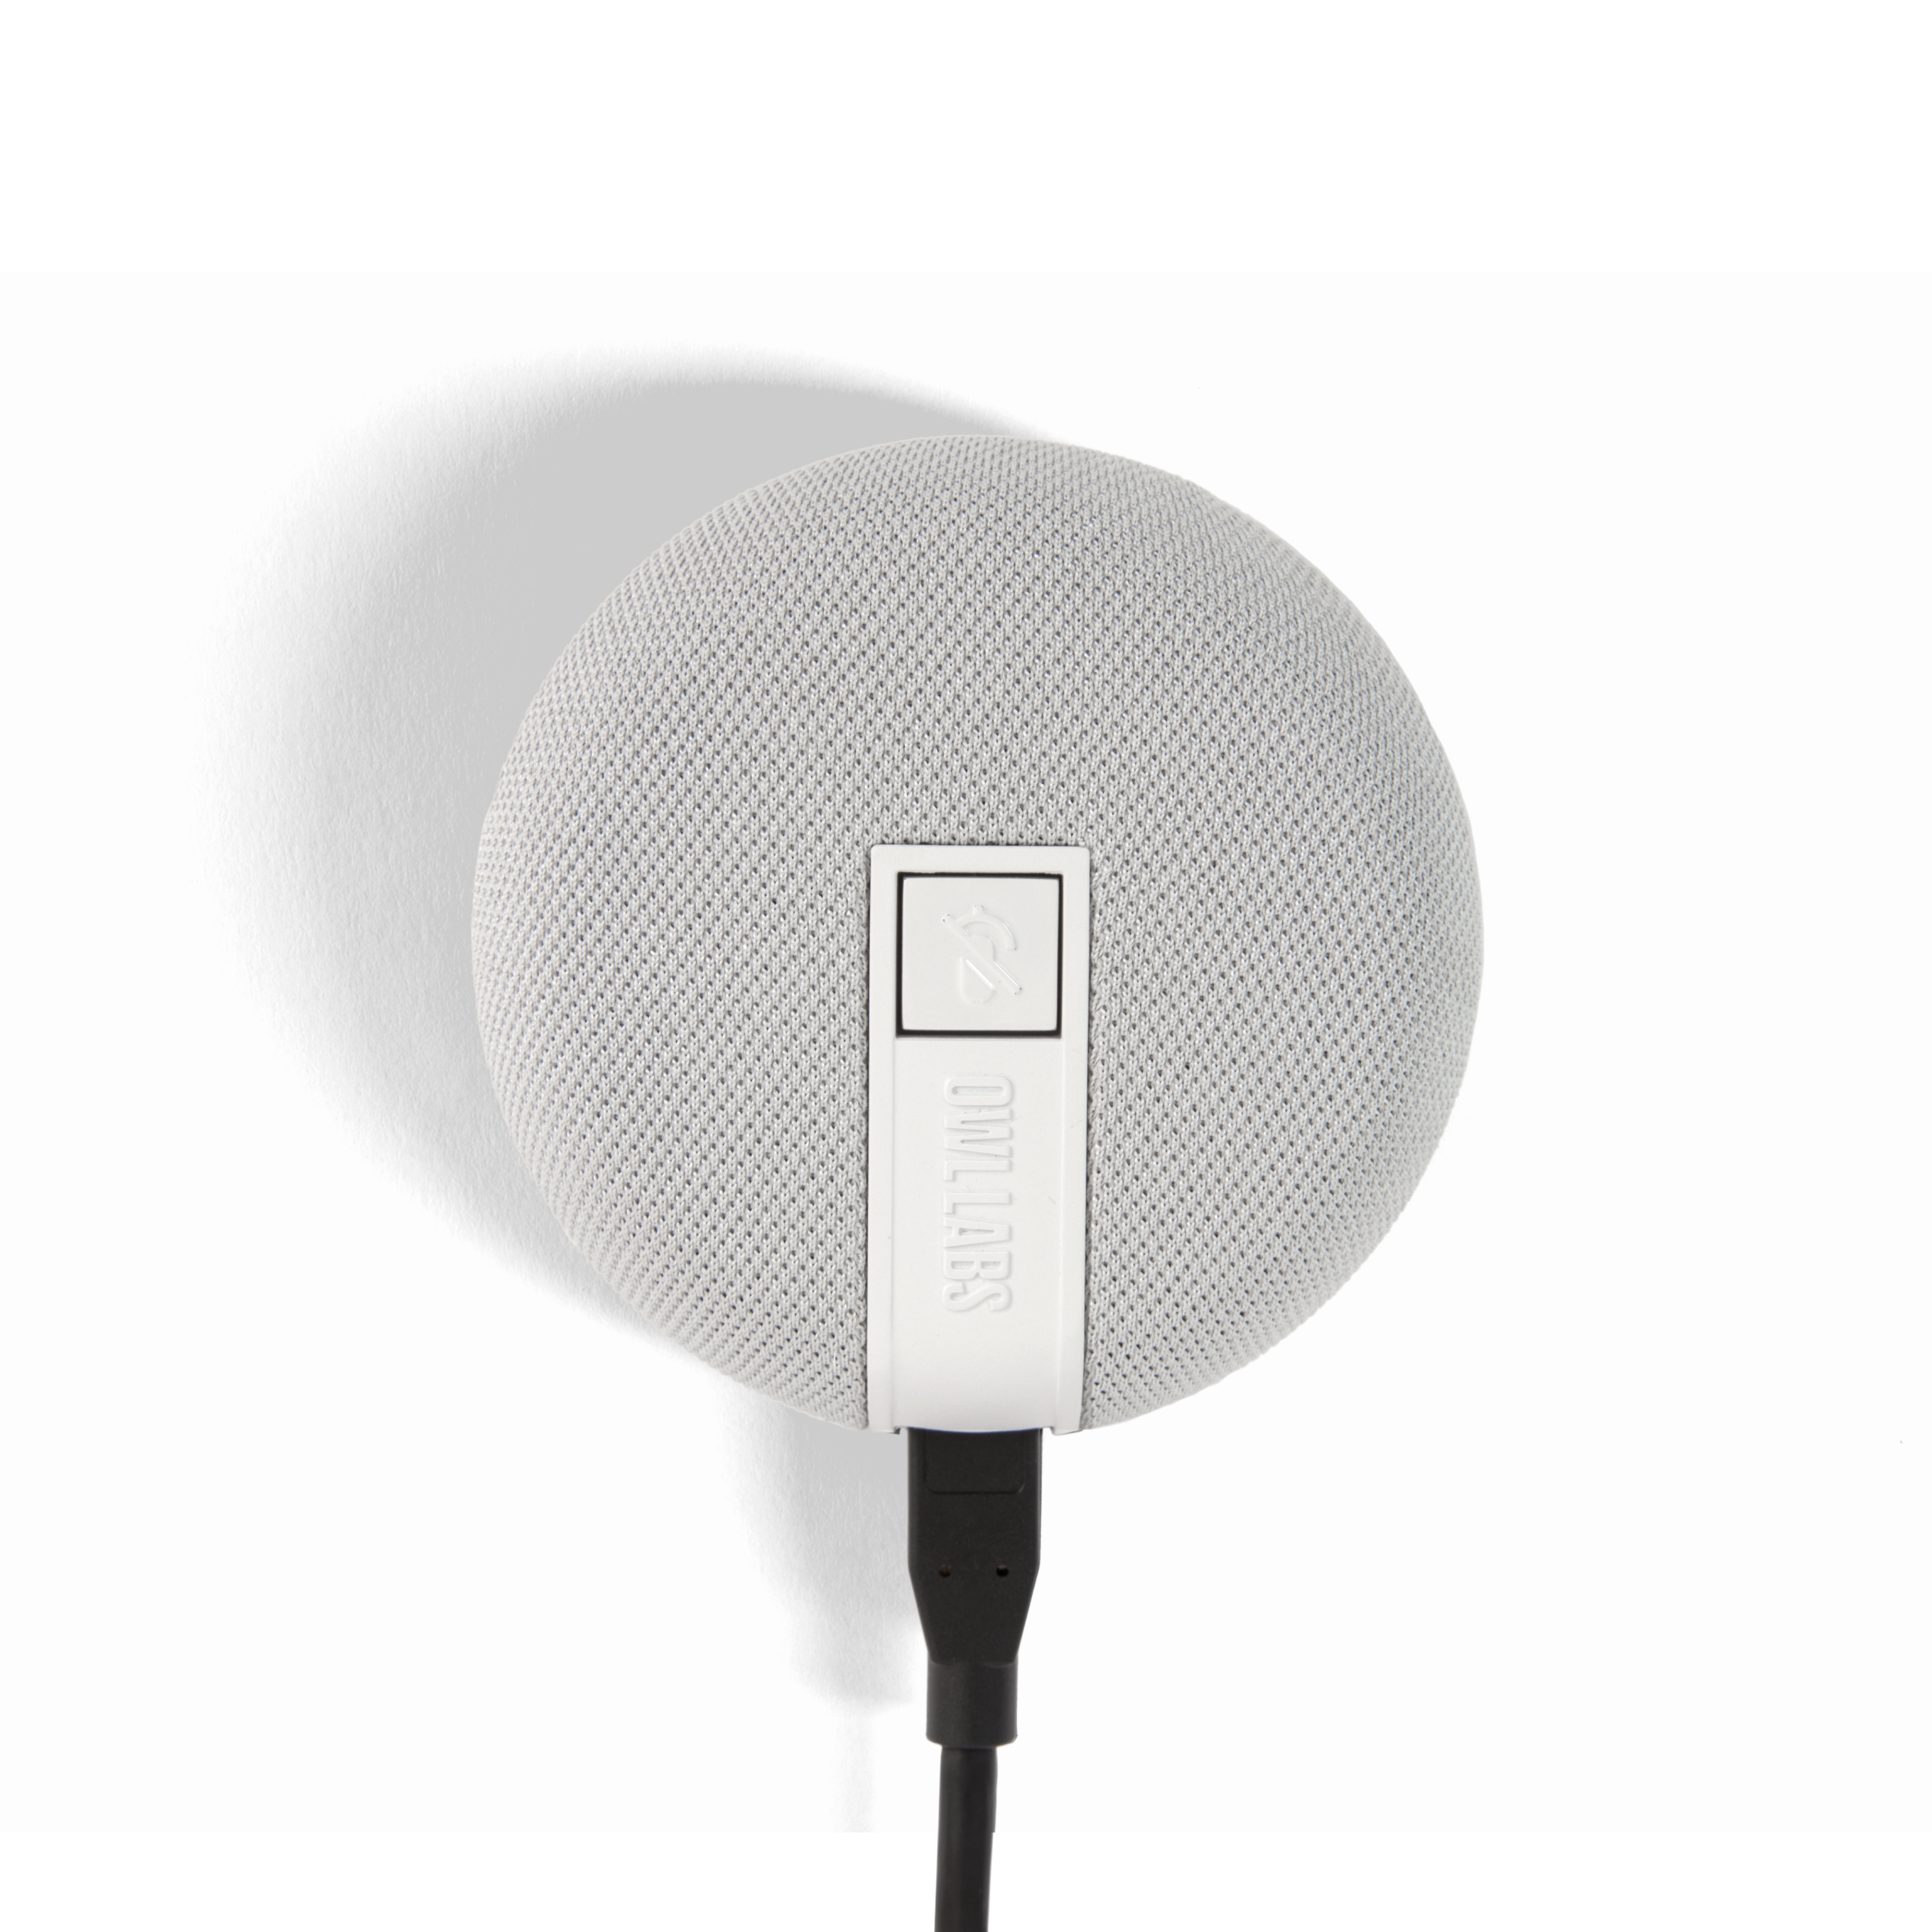 Products | Key Transparent Image | Expansion Mic - gray